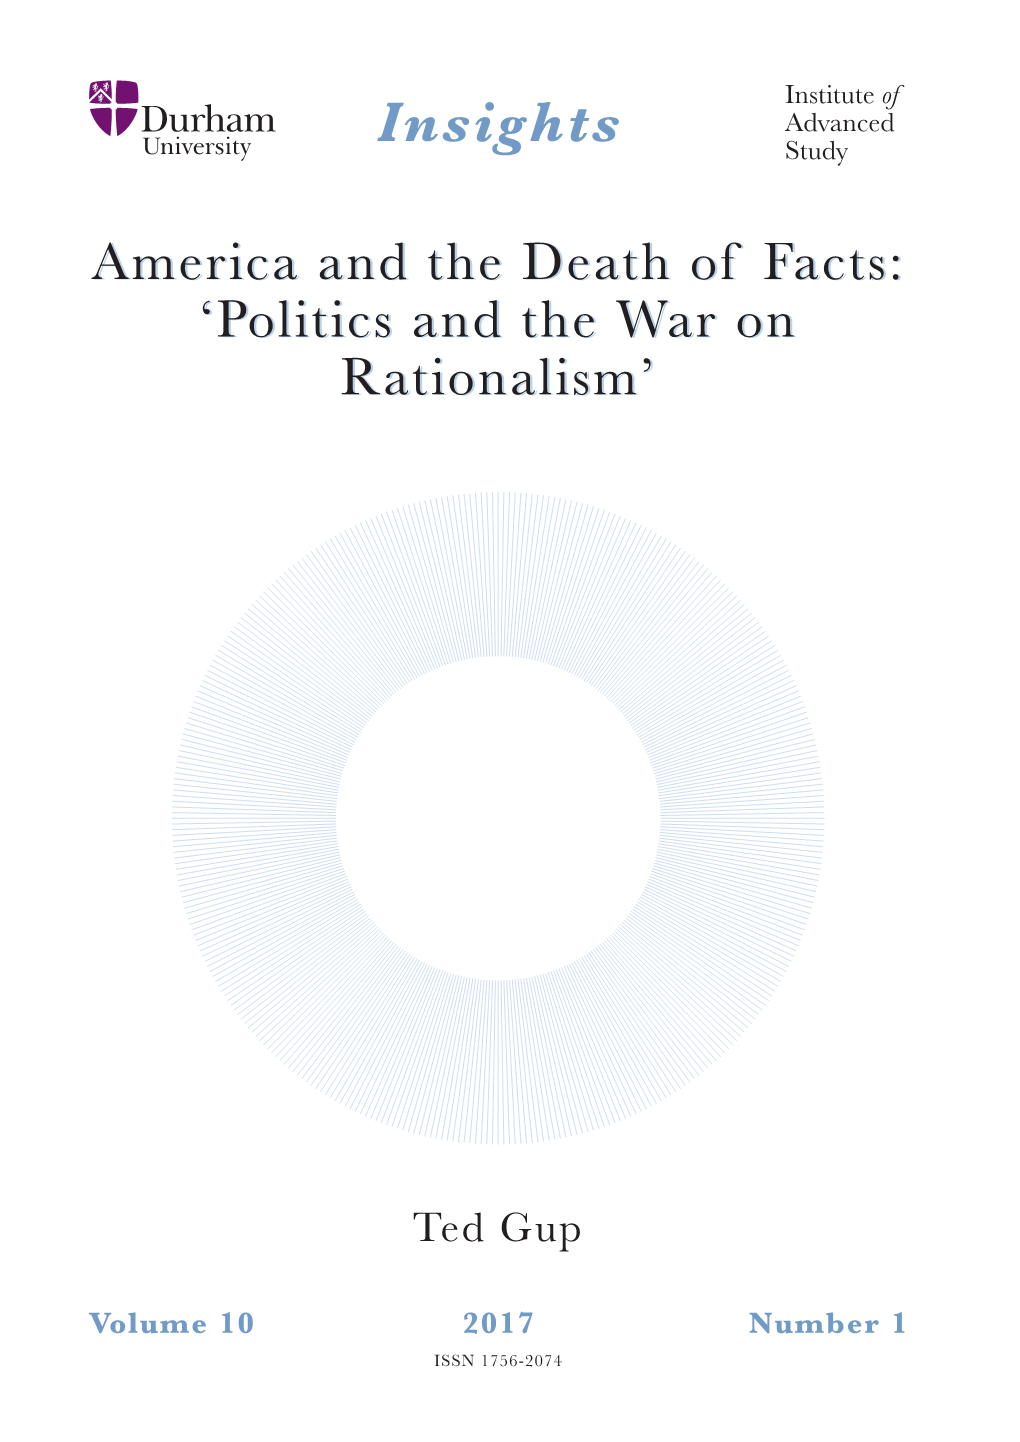 America and the Death of Facts: Politics and War On